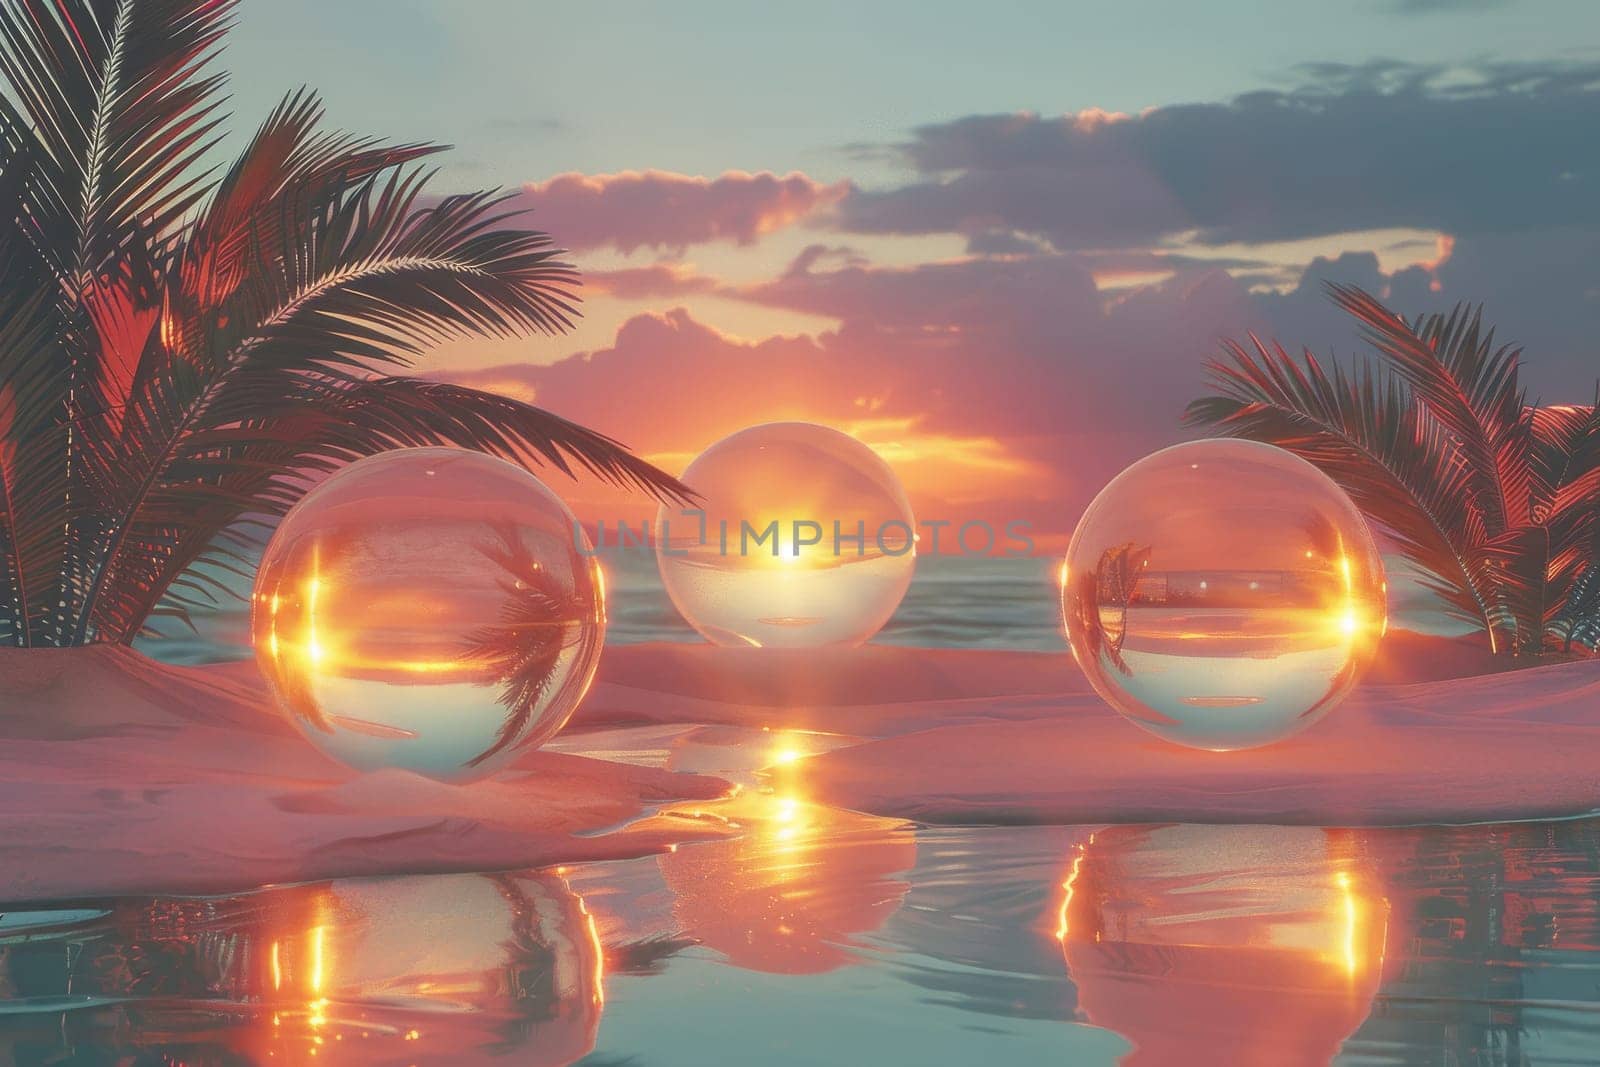 A beach scene with three large glass spheres reflecting the sun. The spheres are surrounded by palm trees and the water is calm. The scene has a peaceful and serene mood